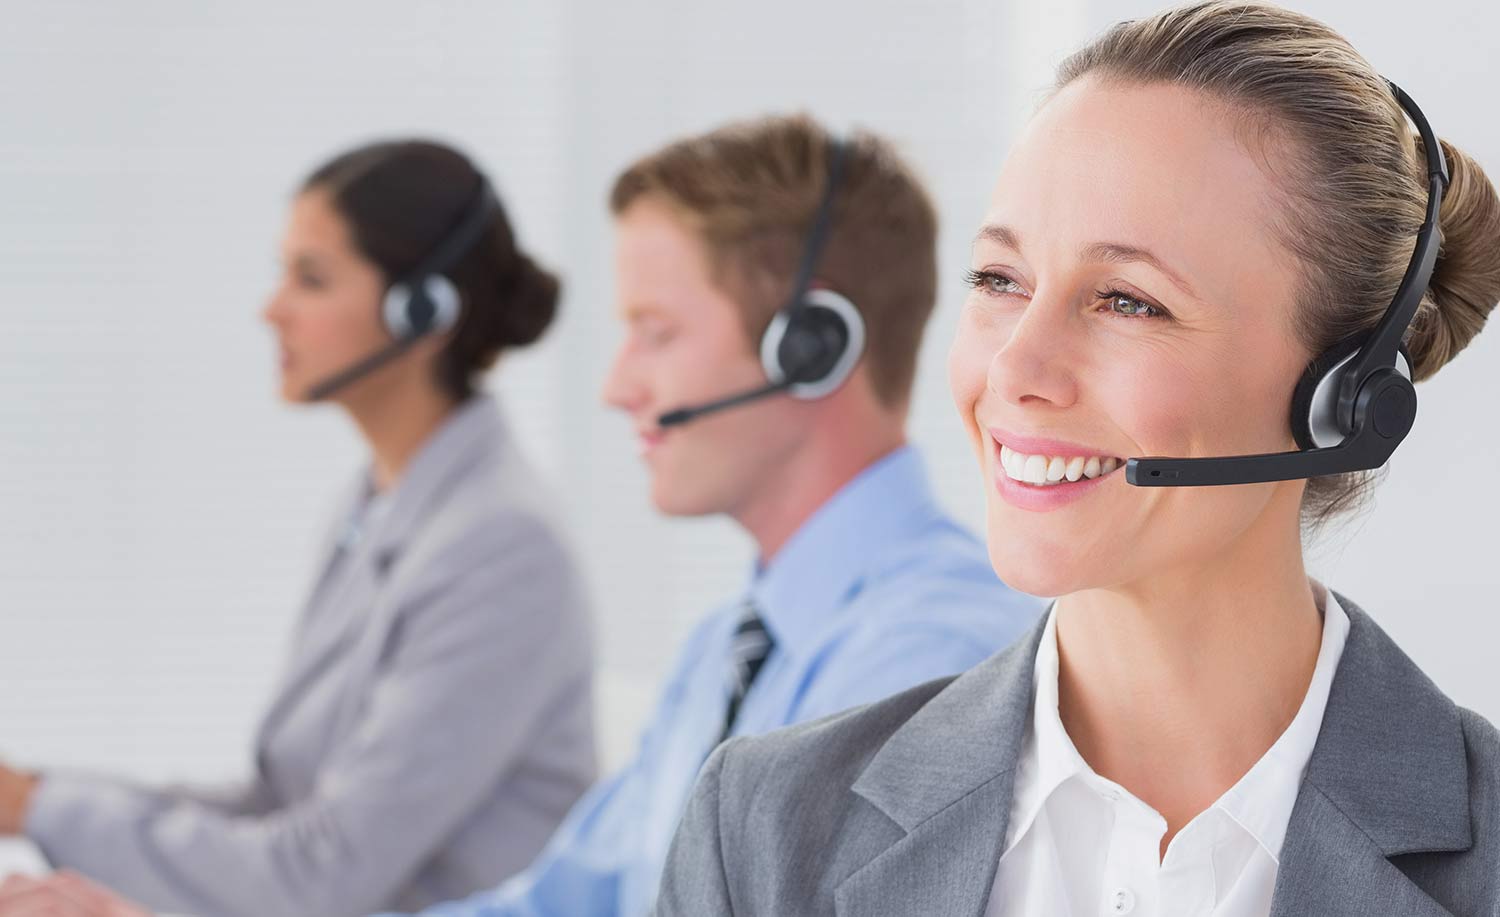 A Telephone Service Representative works with high competence on answering client's calls